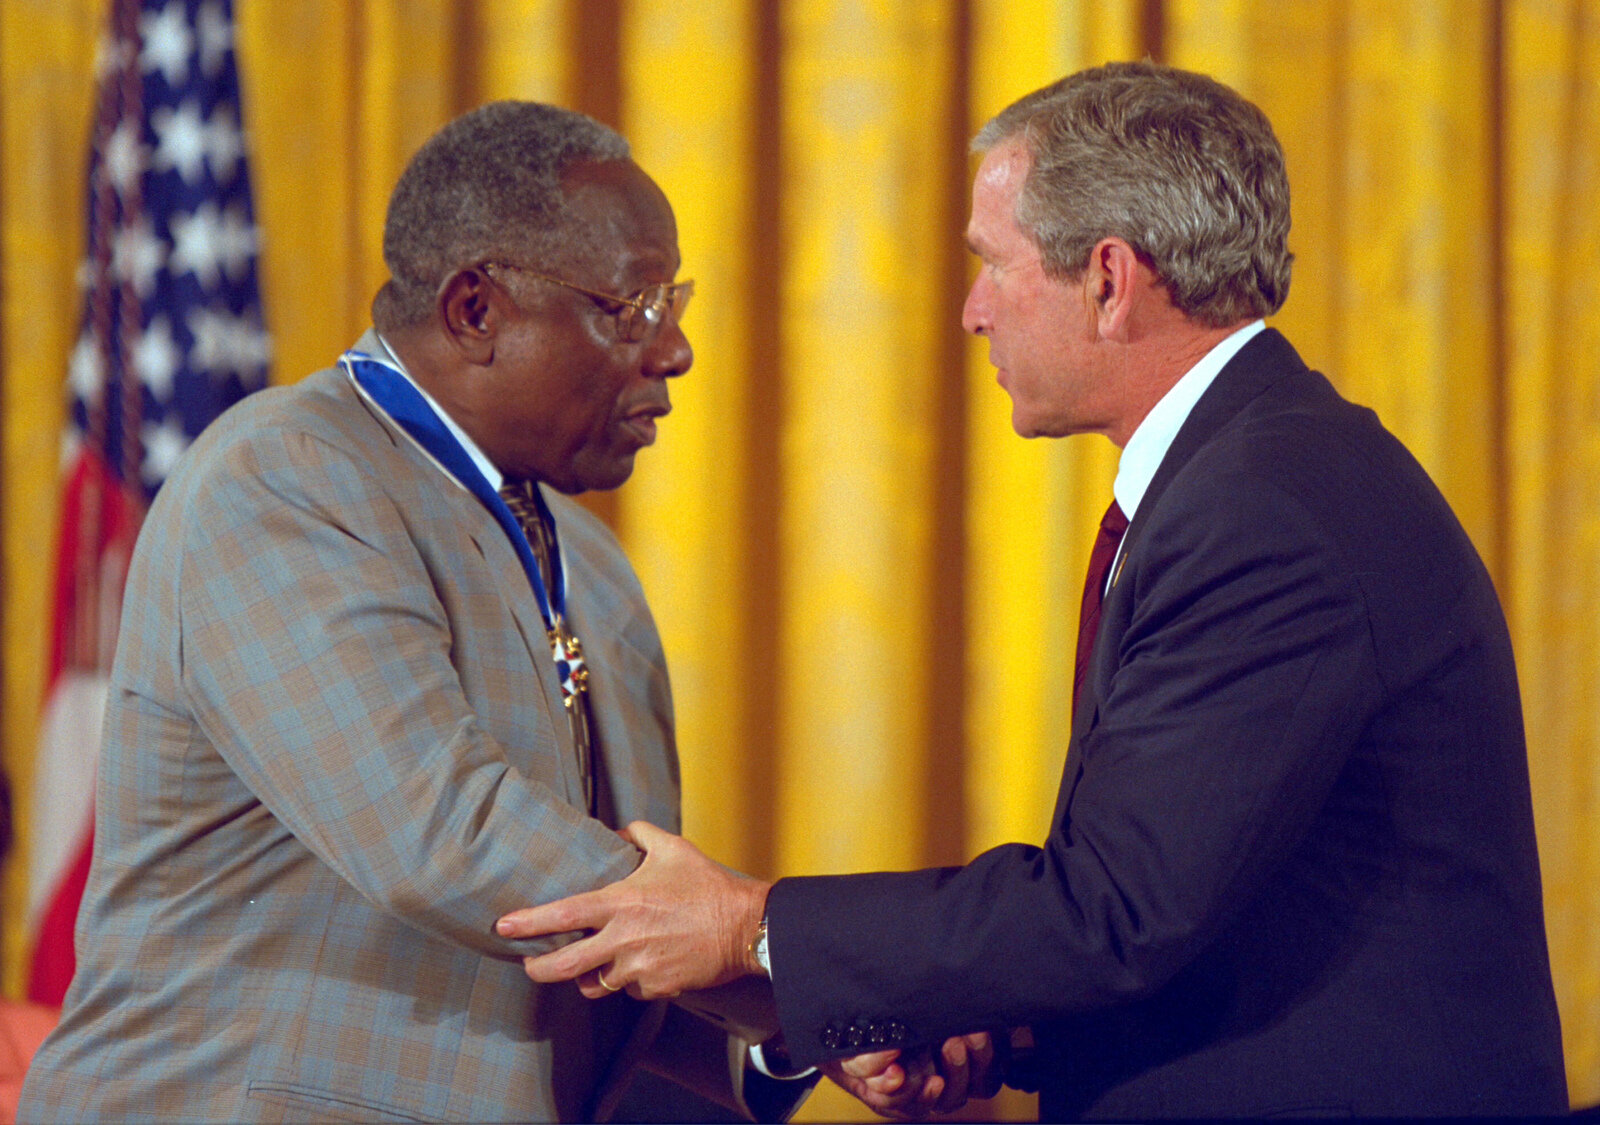 President George W. Bush presents the Presidential Medal of Freedom to baseball legend Hank Aaron, during ceremonies in the East Room. (Photo by the U.S. National Archives)